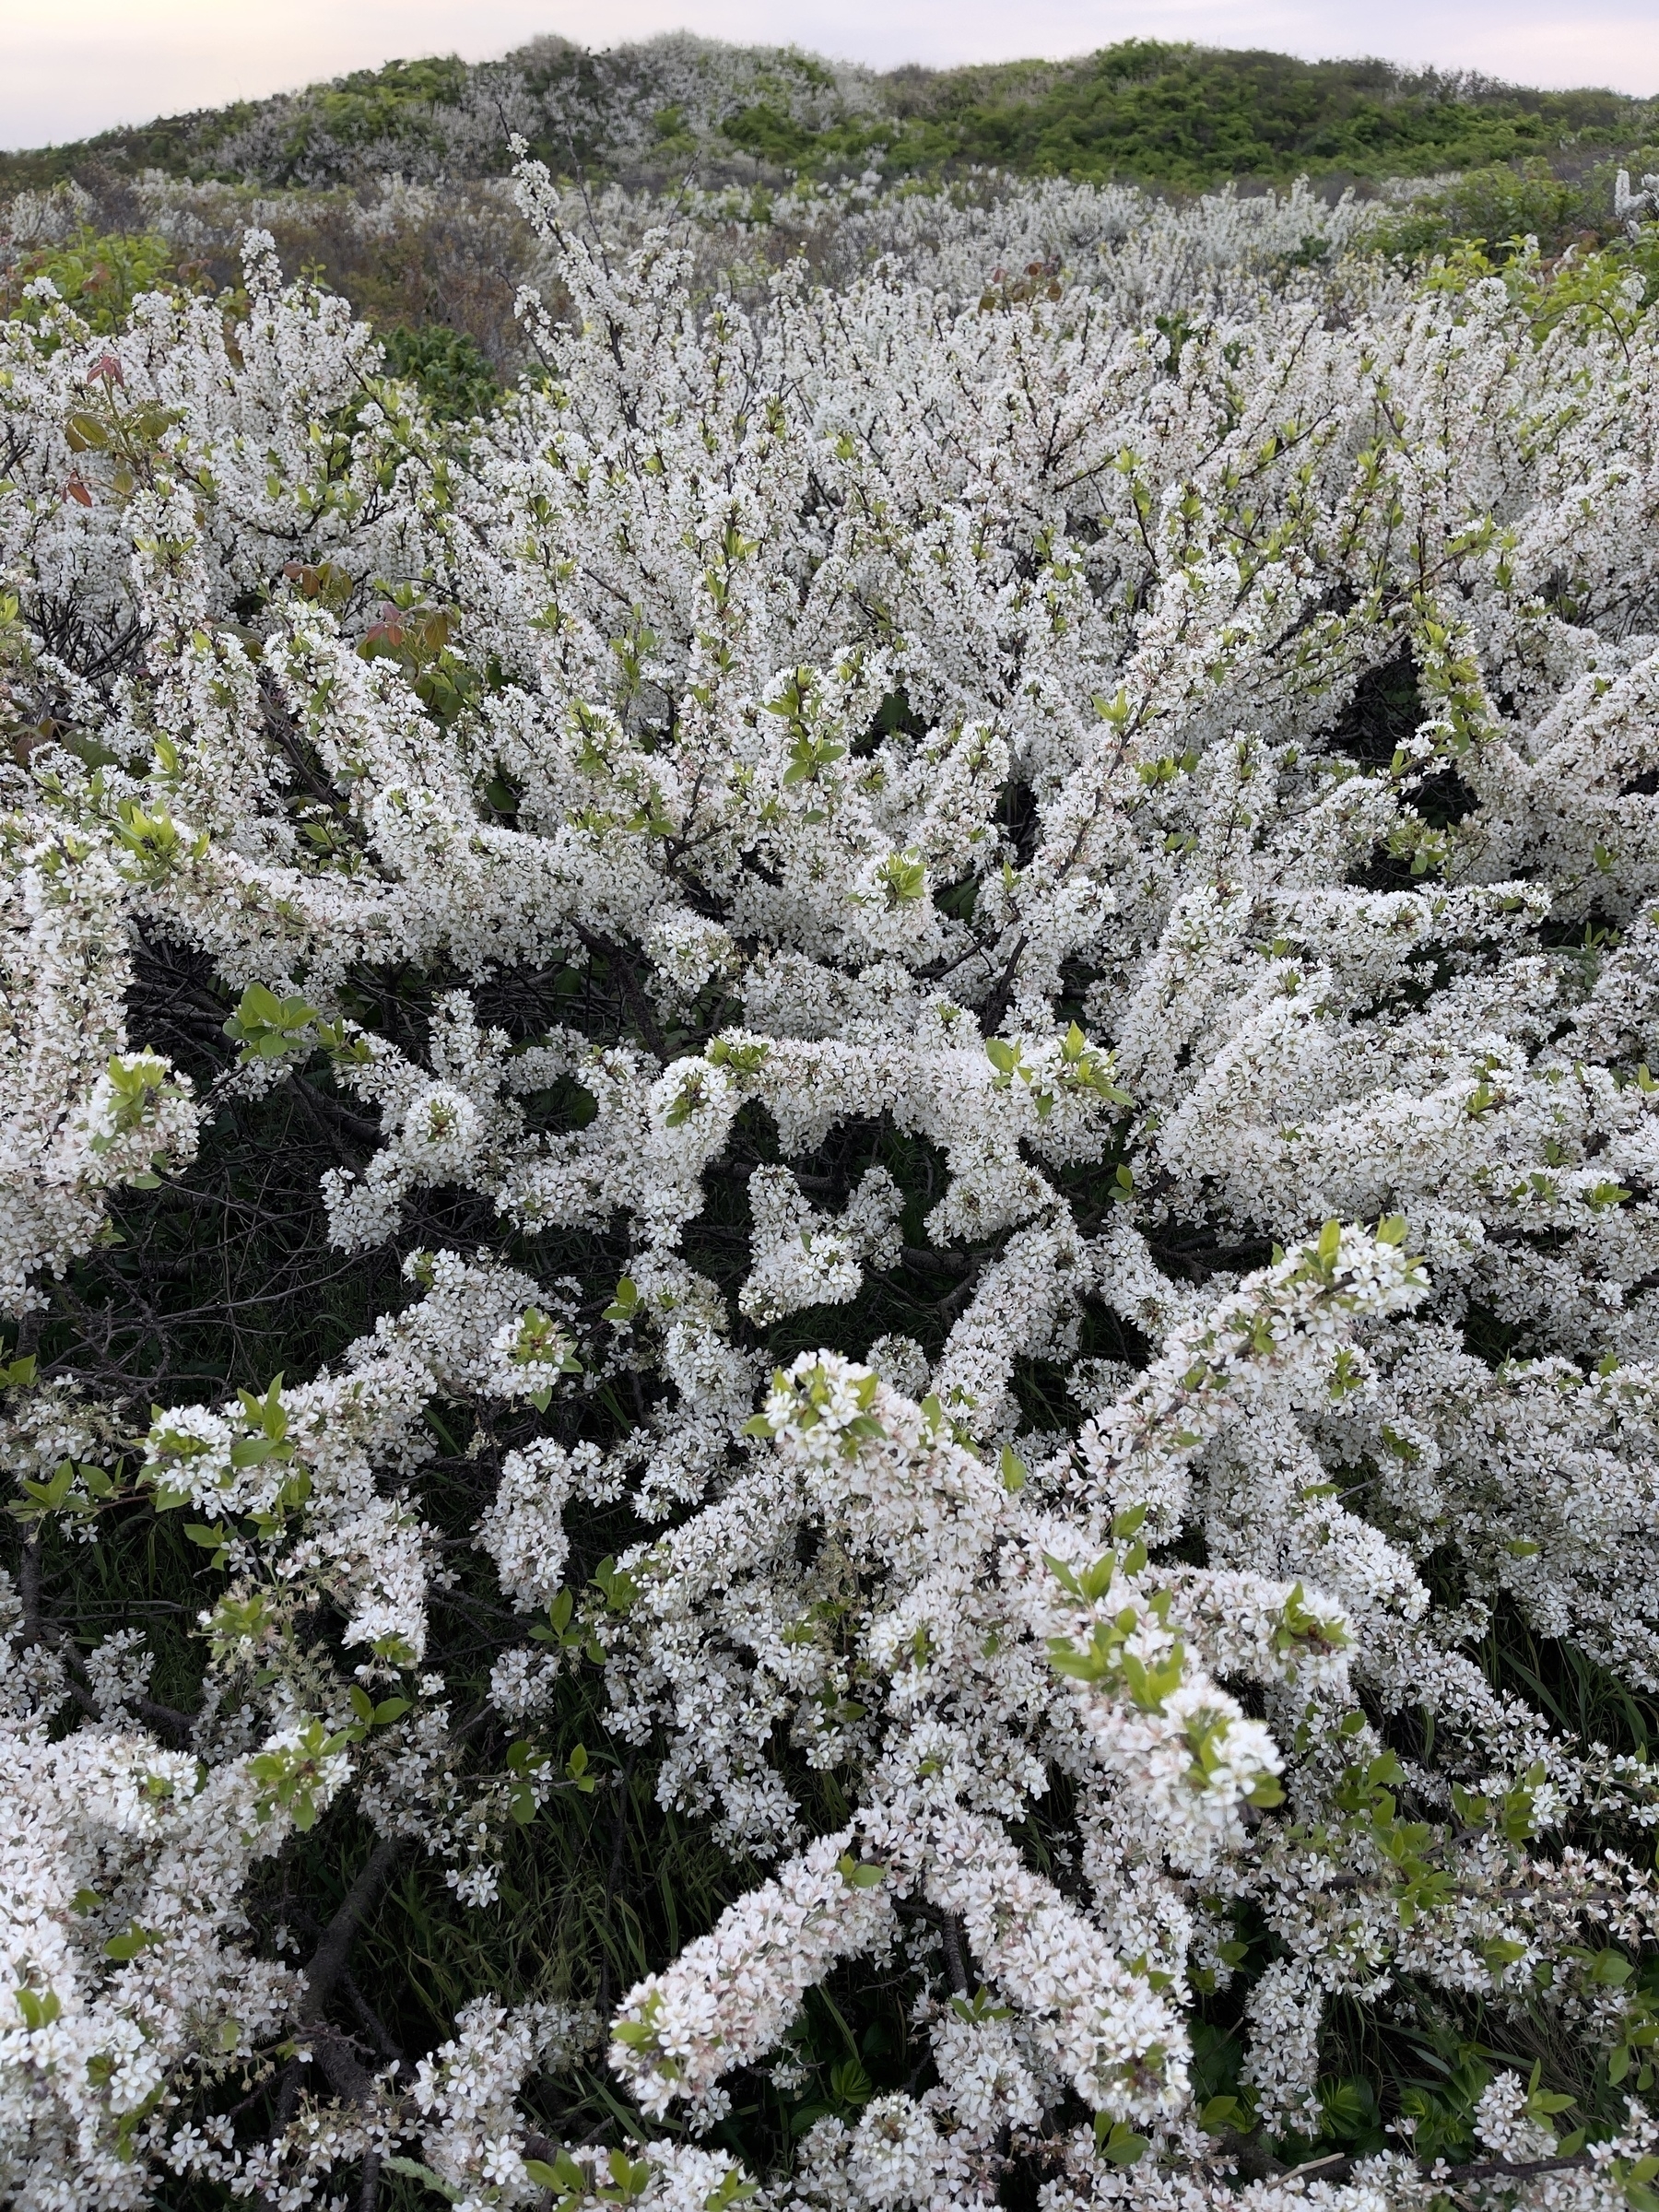 Shrub branches wrapped in tiny white flowers, dunes in the background.